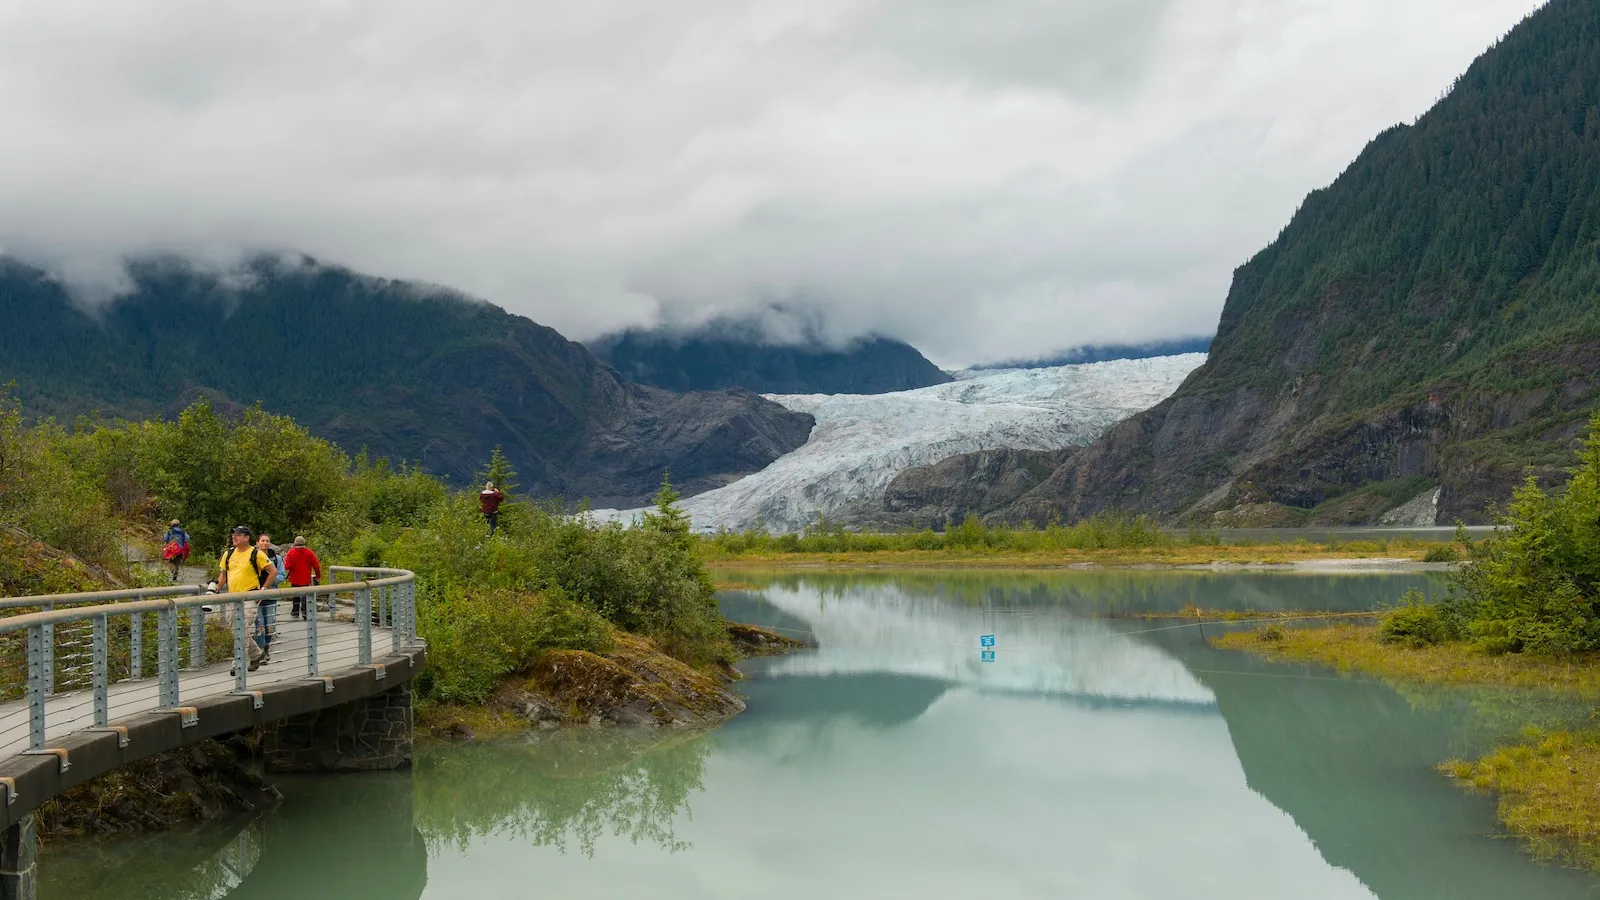 A view of Mendenhall Glacier, which is retreating.